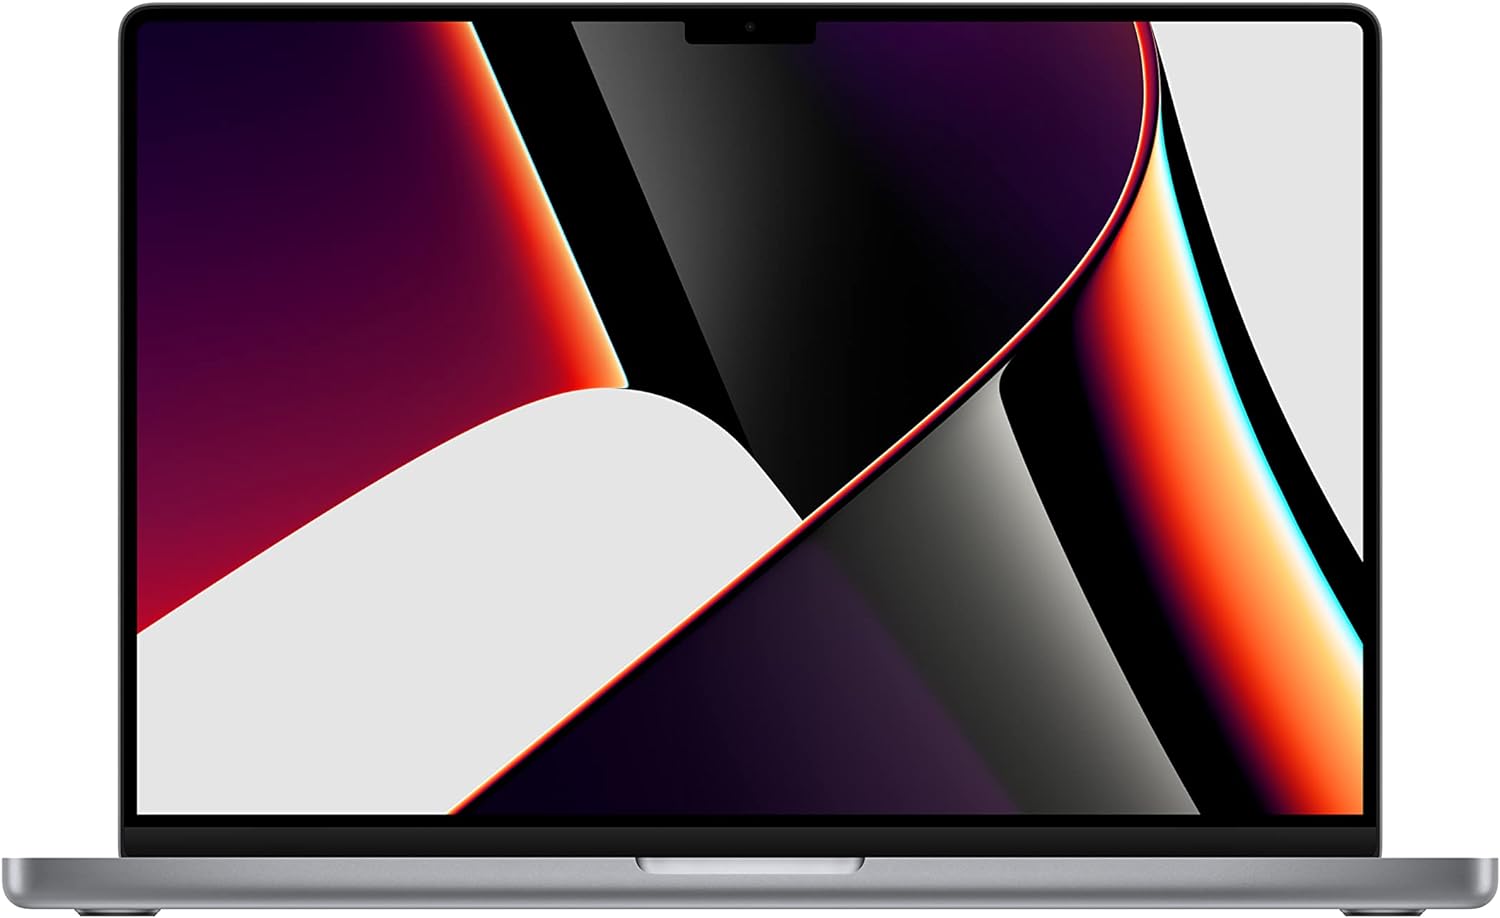 Apple 2021 MacBook Pro (16.2-inch, M1 Pro chip with 10‑core CPU and 16‑core GPU, 16GB RAM, 512GB SSD) – Space Gray